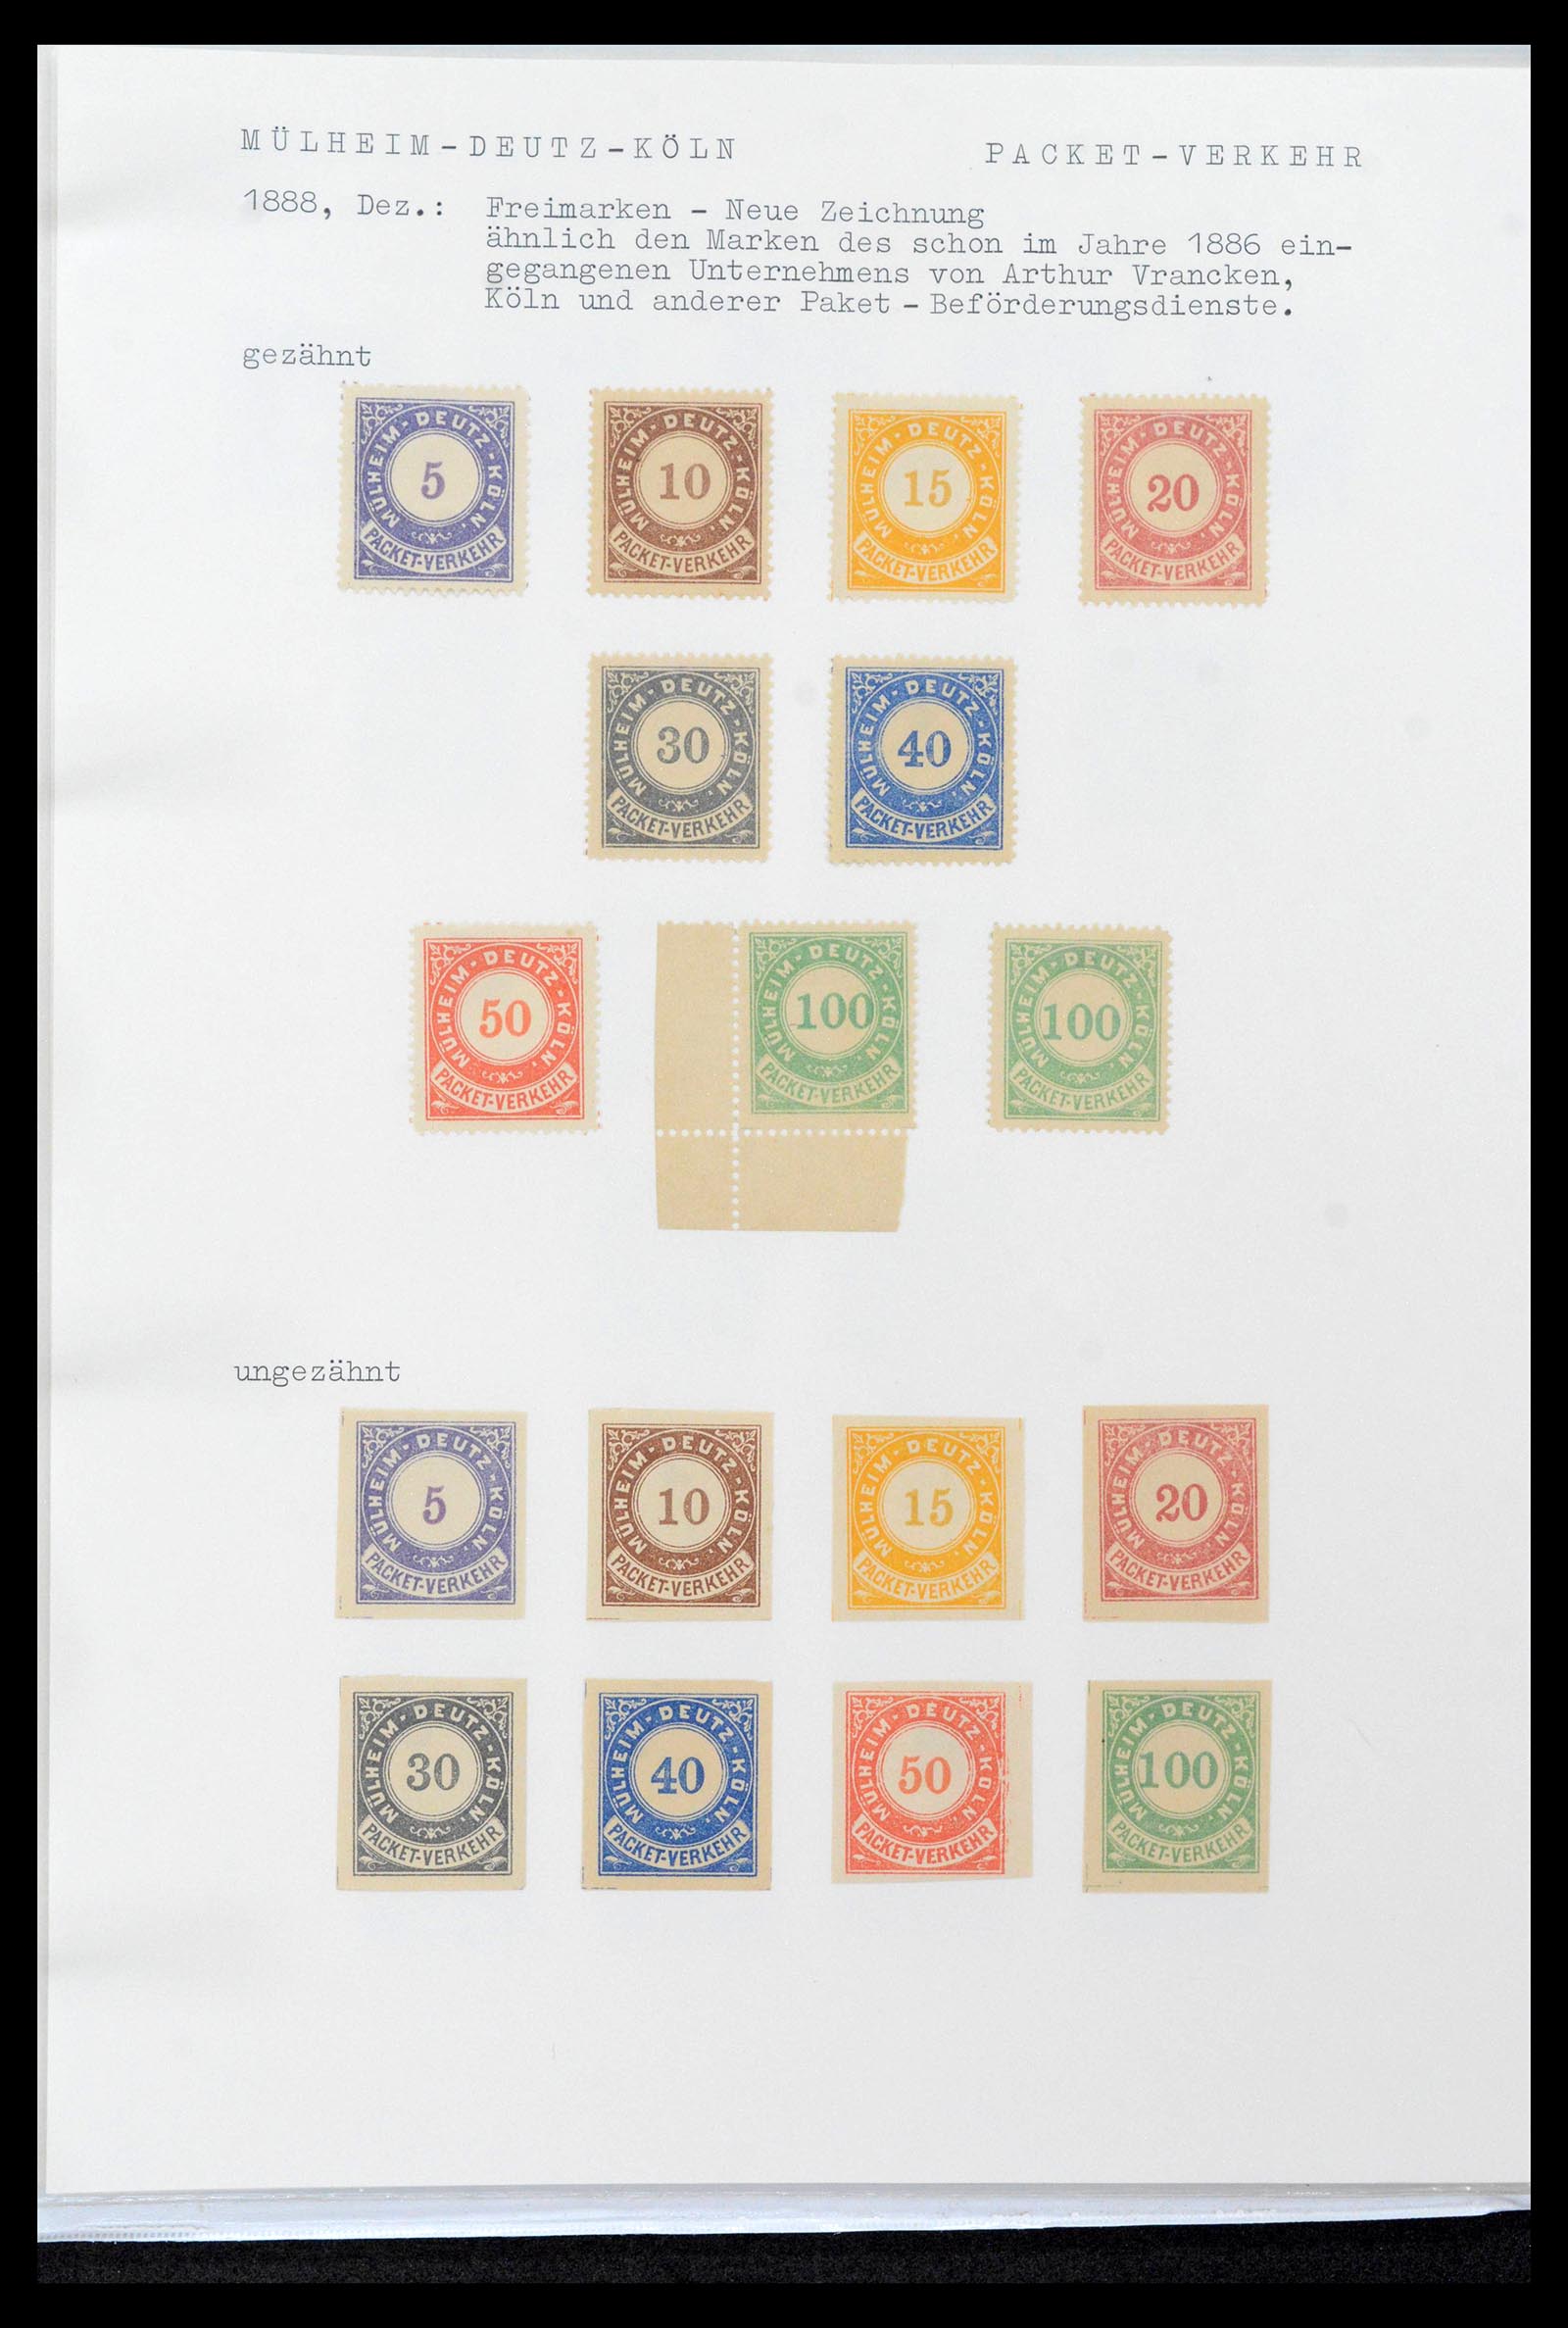 39369 0034 - Stamp collection 39369 Germany citypost 1886-1899.